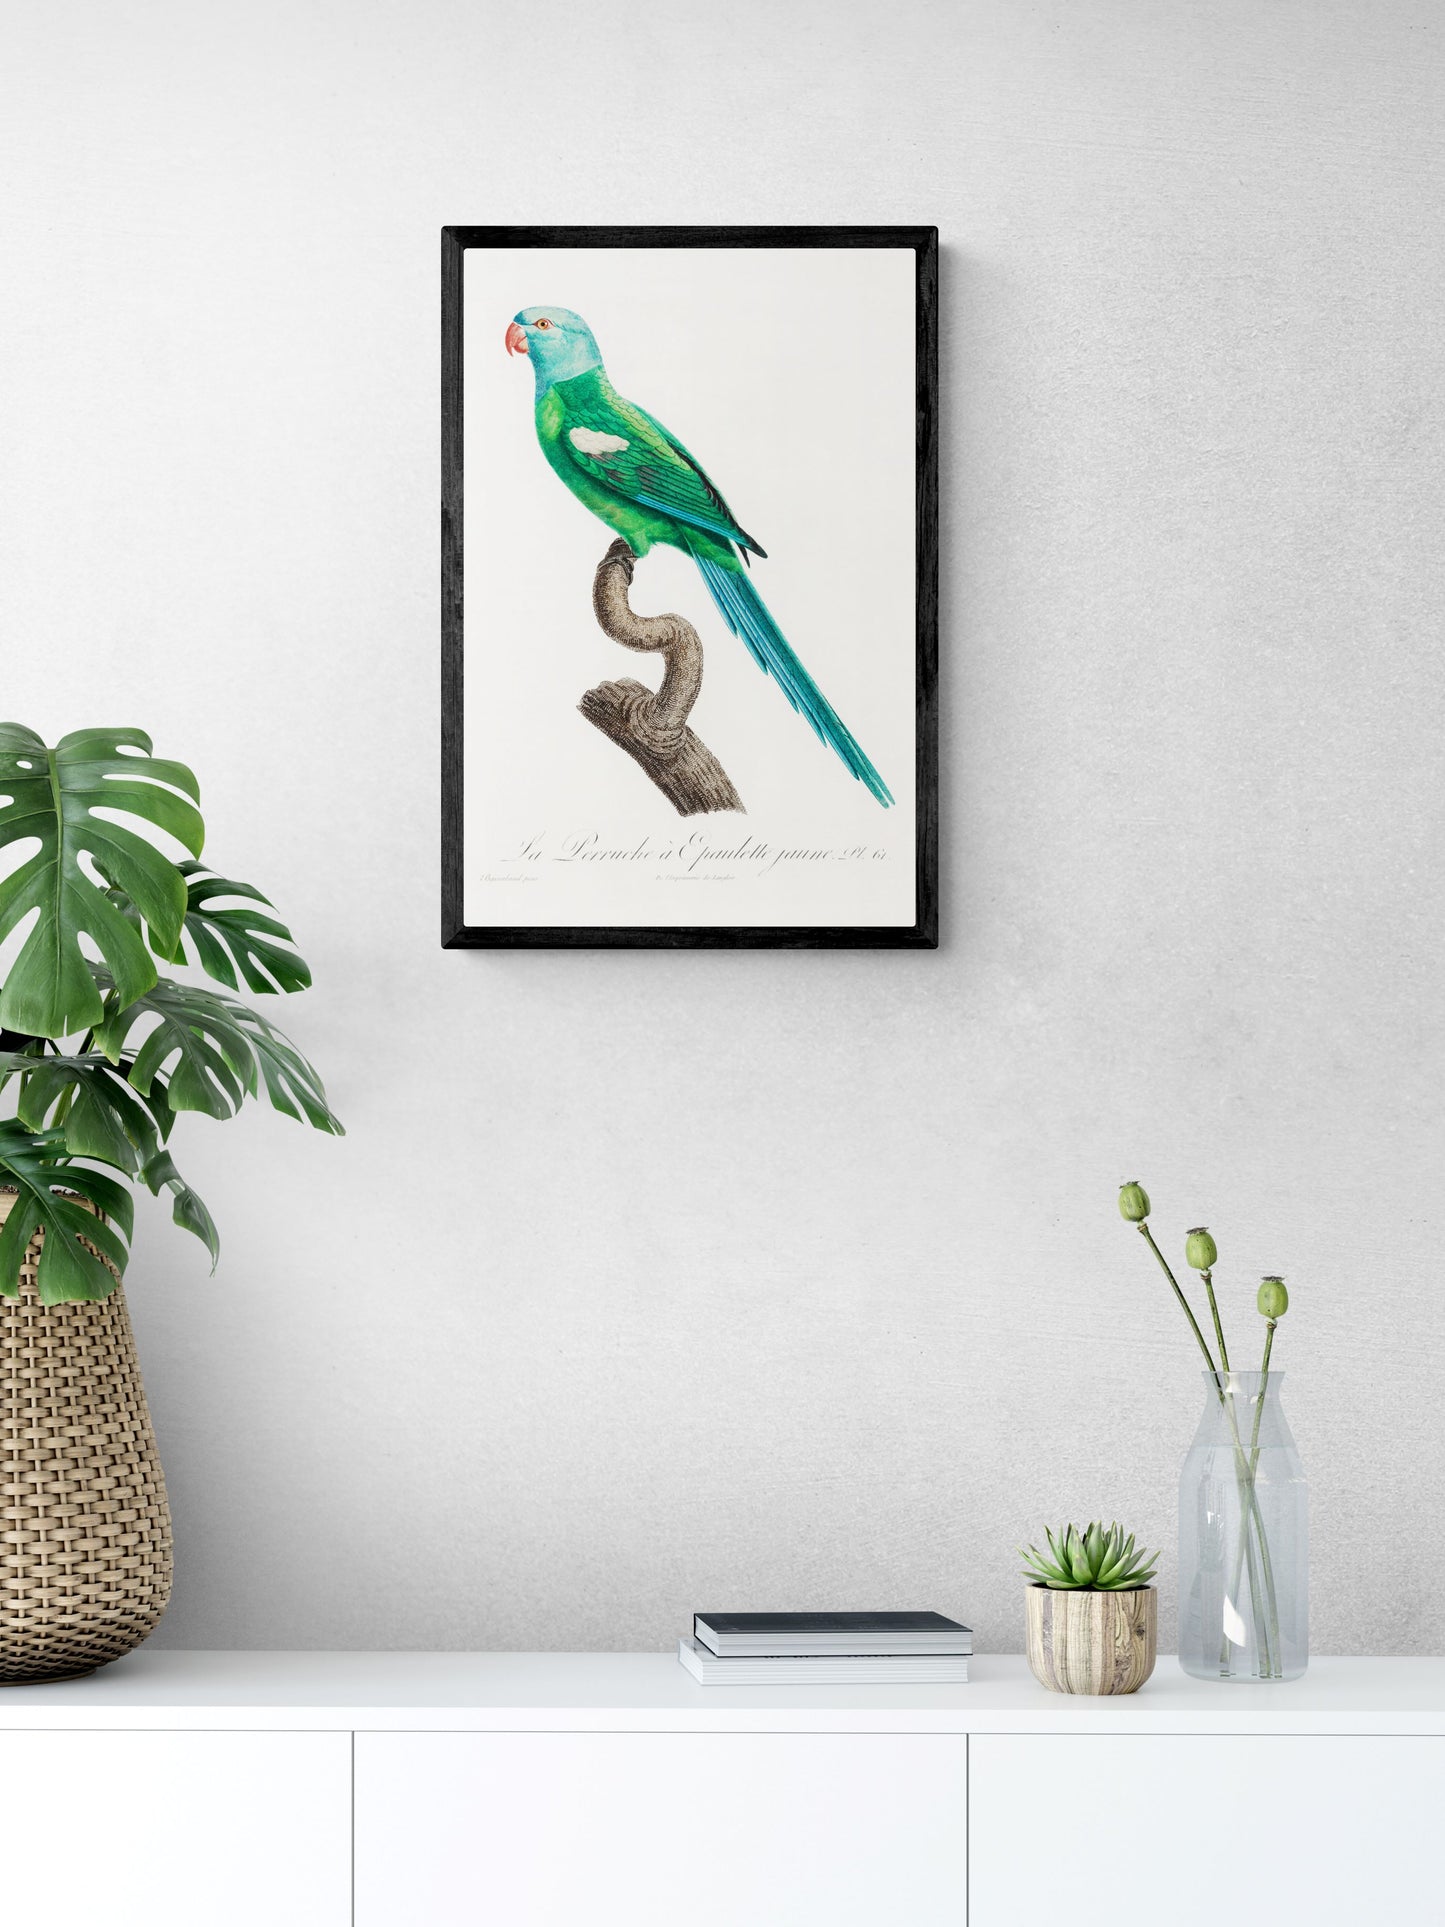 Vintage naturalistic The Yellow-Shouldered Amazon, Amazona barbadensis illustrations. Prints on art paper, canvas and framed canvas. Free shipping in the USA.